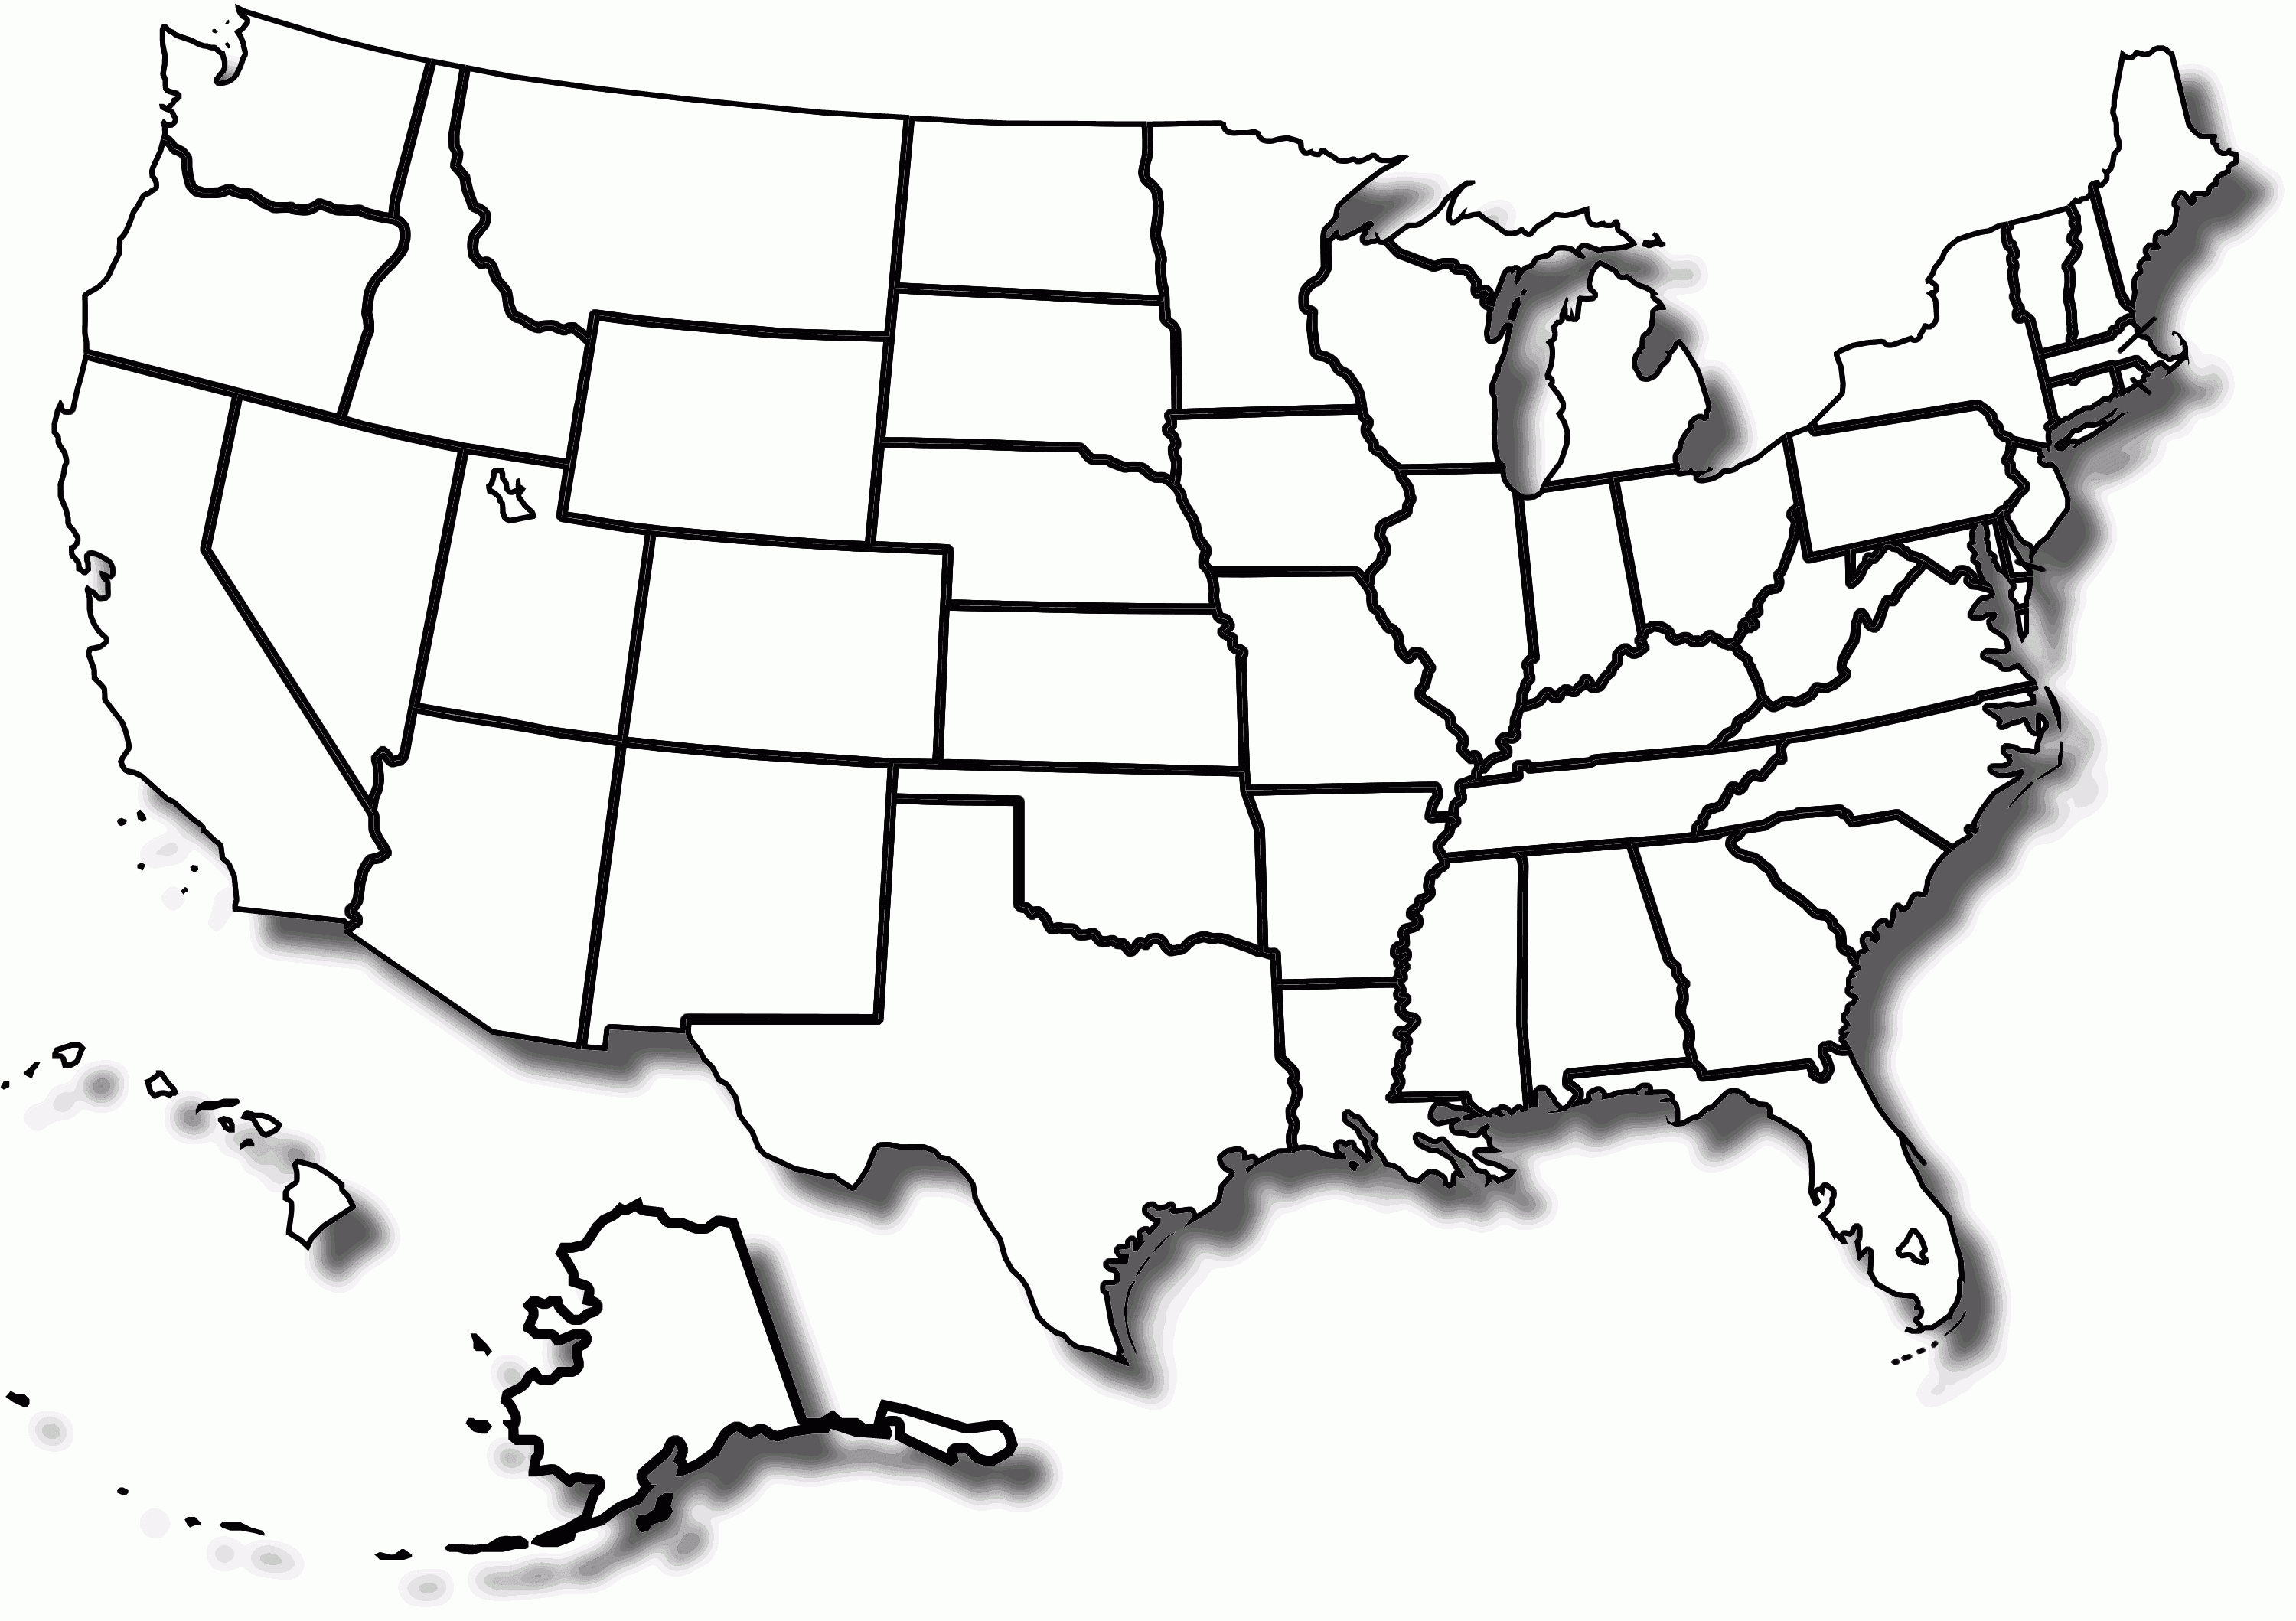 1094 Views | Social Studies K 3 | United States Map Throughout Blank Template Of The United States